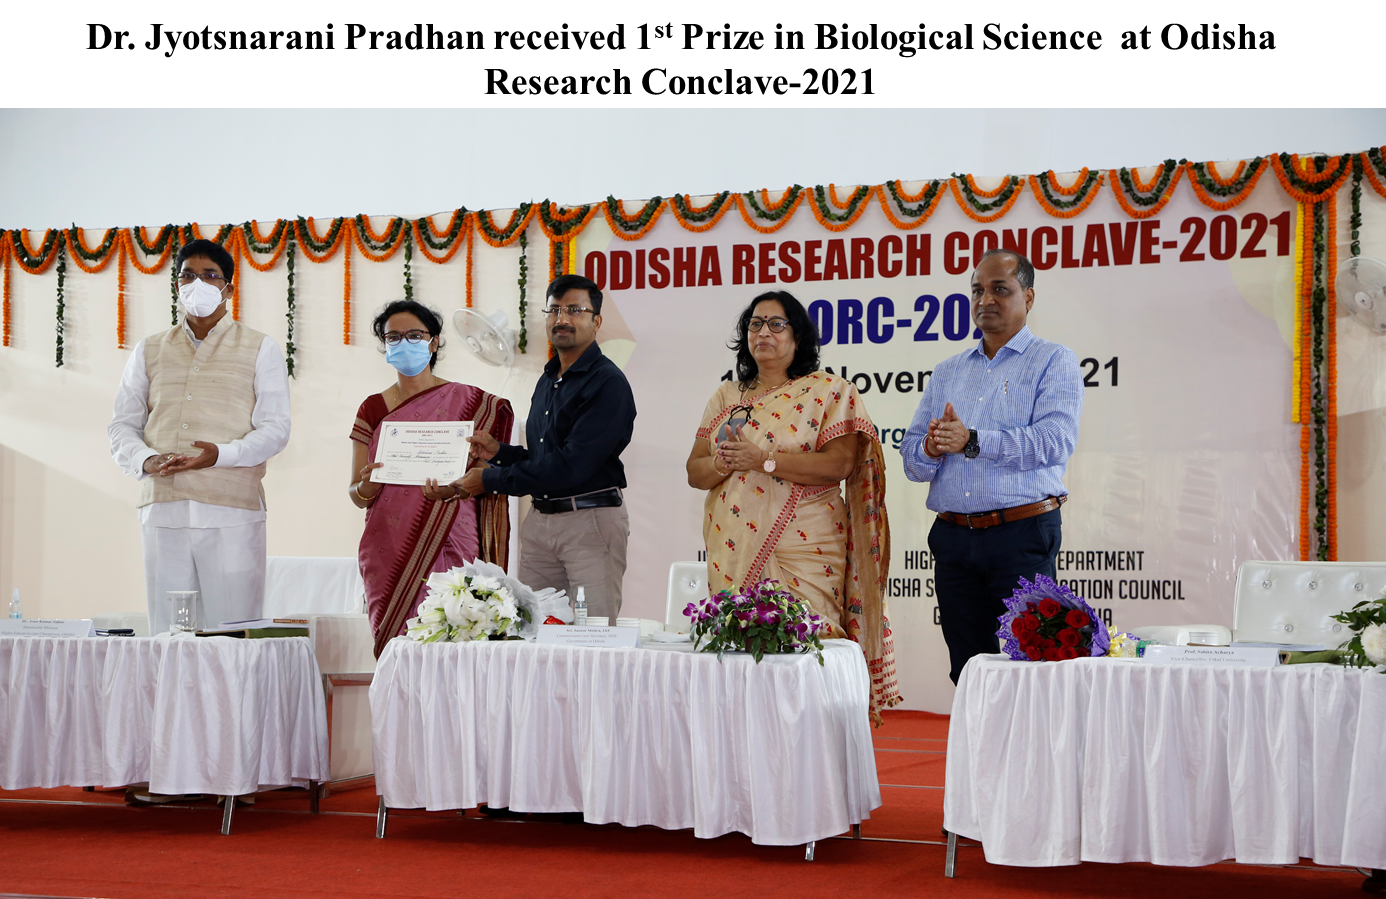 Dr. Jyotsnarani Pradhan received 1st prize in Biological Science at Odisha Research Conclave-2021